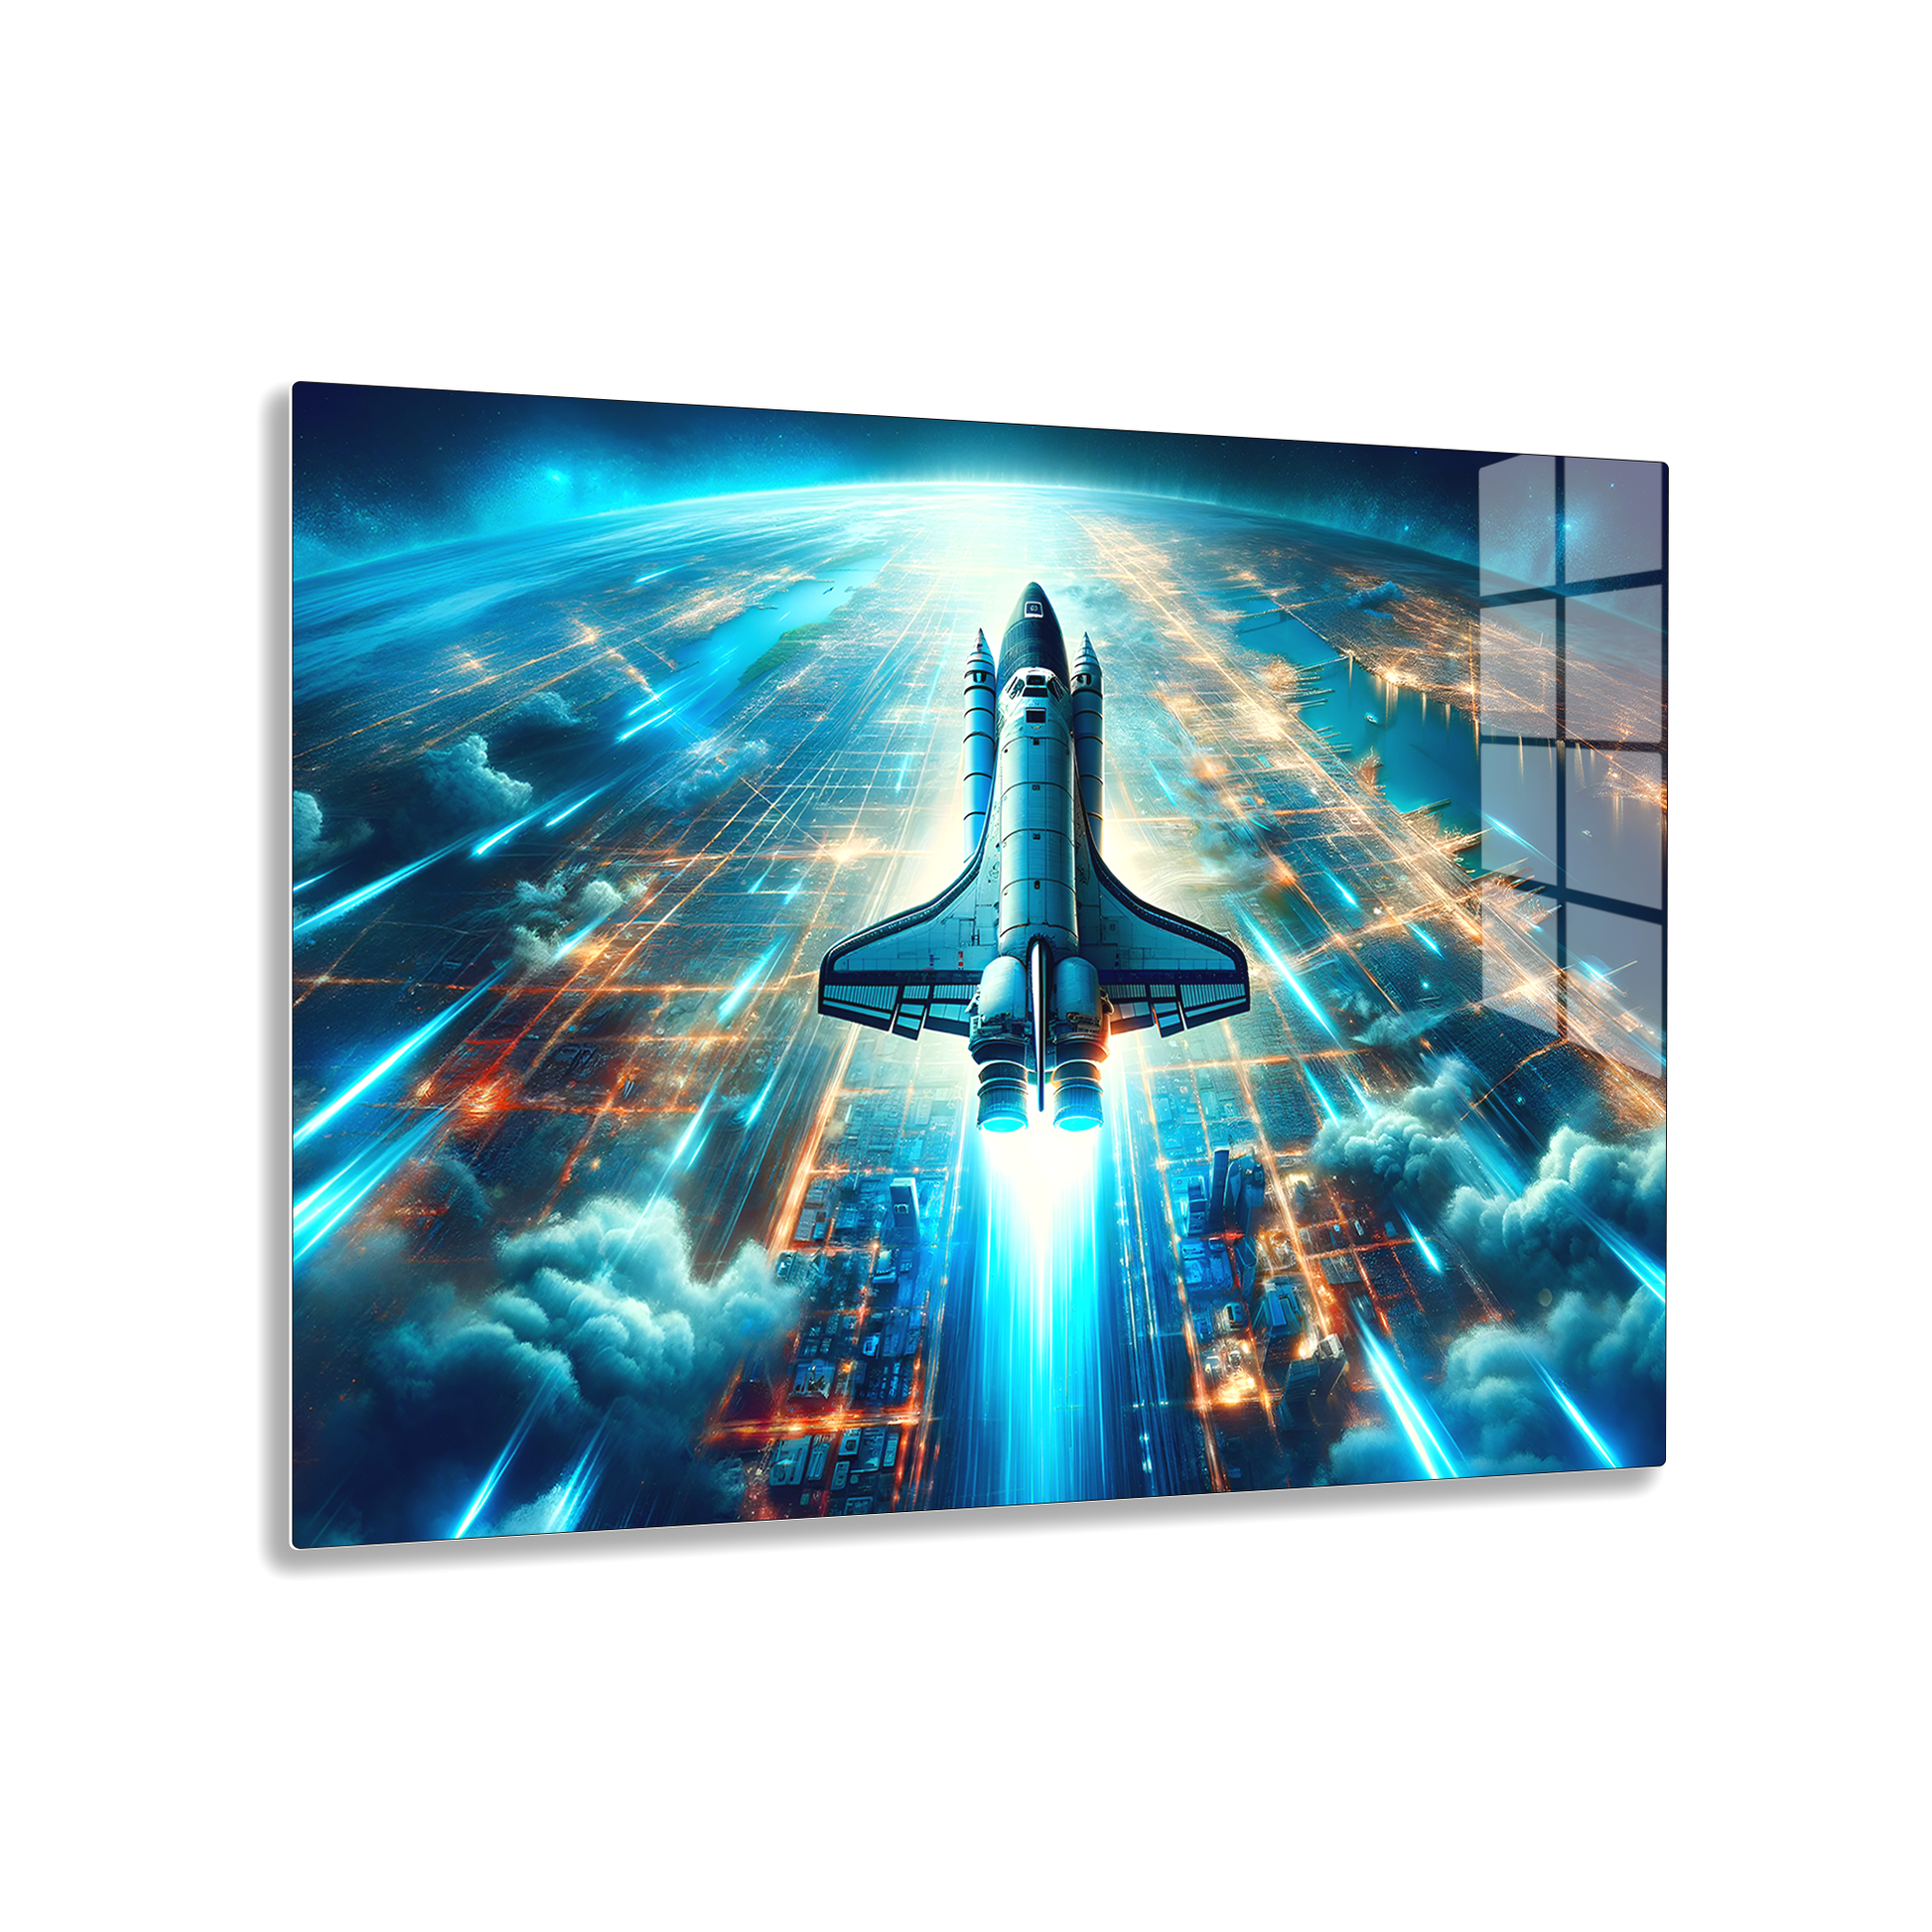 Orbital Blaze Odyssey (Acrylic)Make a statement with Orbital Blaze Odyssey acrylic prints. The 1⁄4" acrylic panel exudes the illusion of a smooth glass surface for vibrant artwork. Pre-installed hRimaGallery